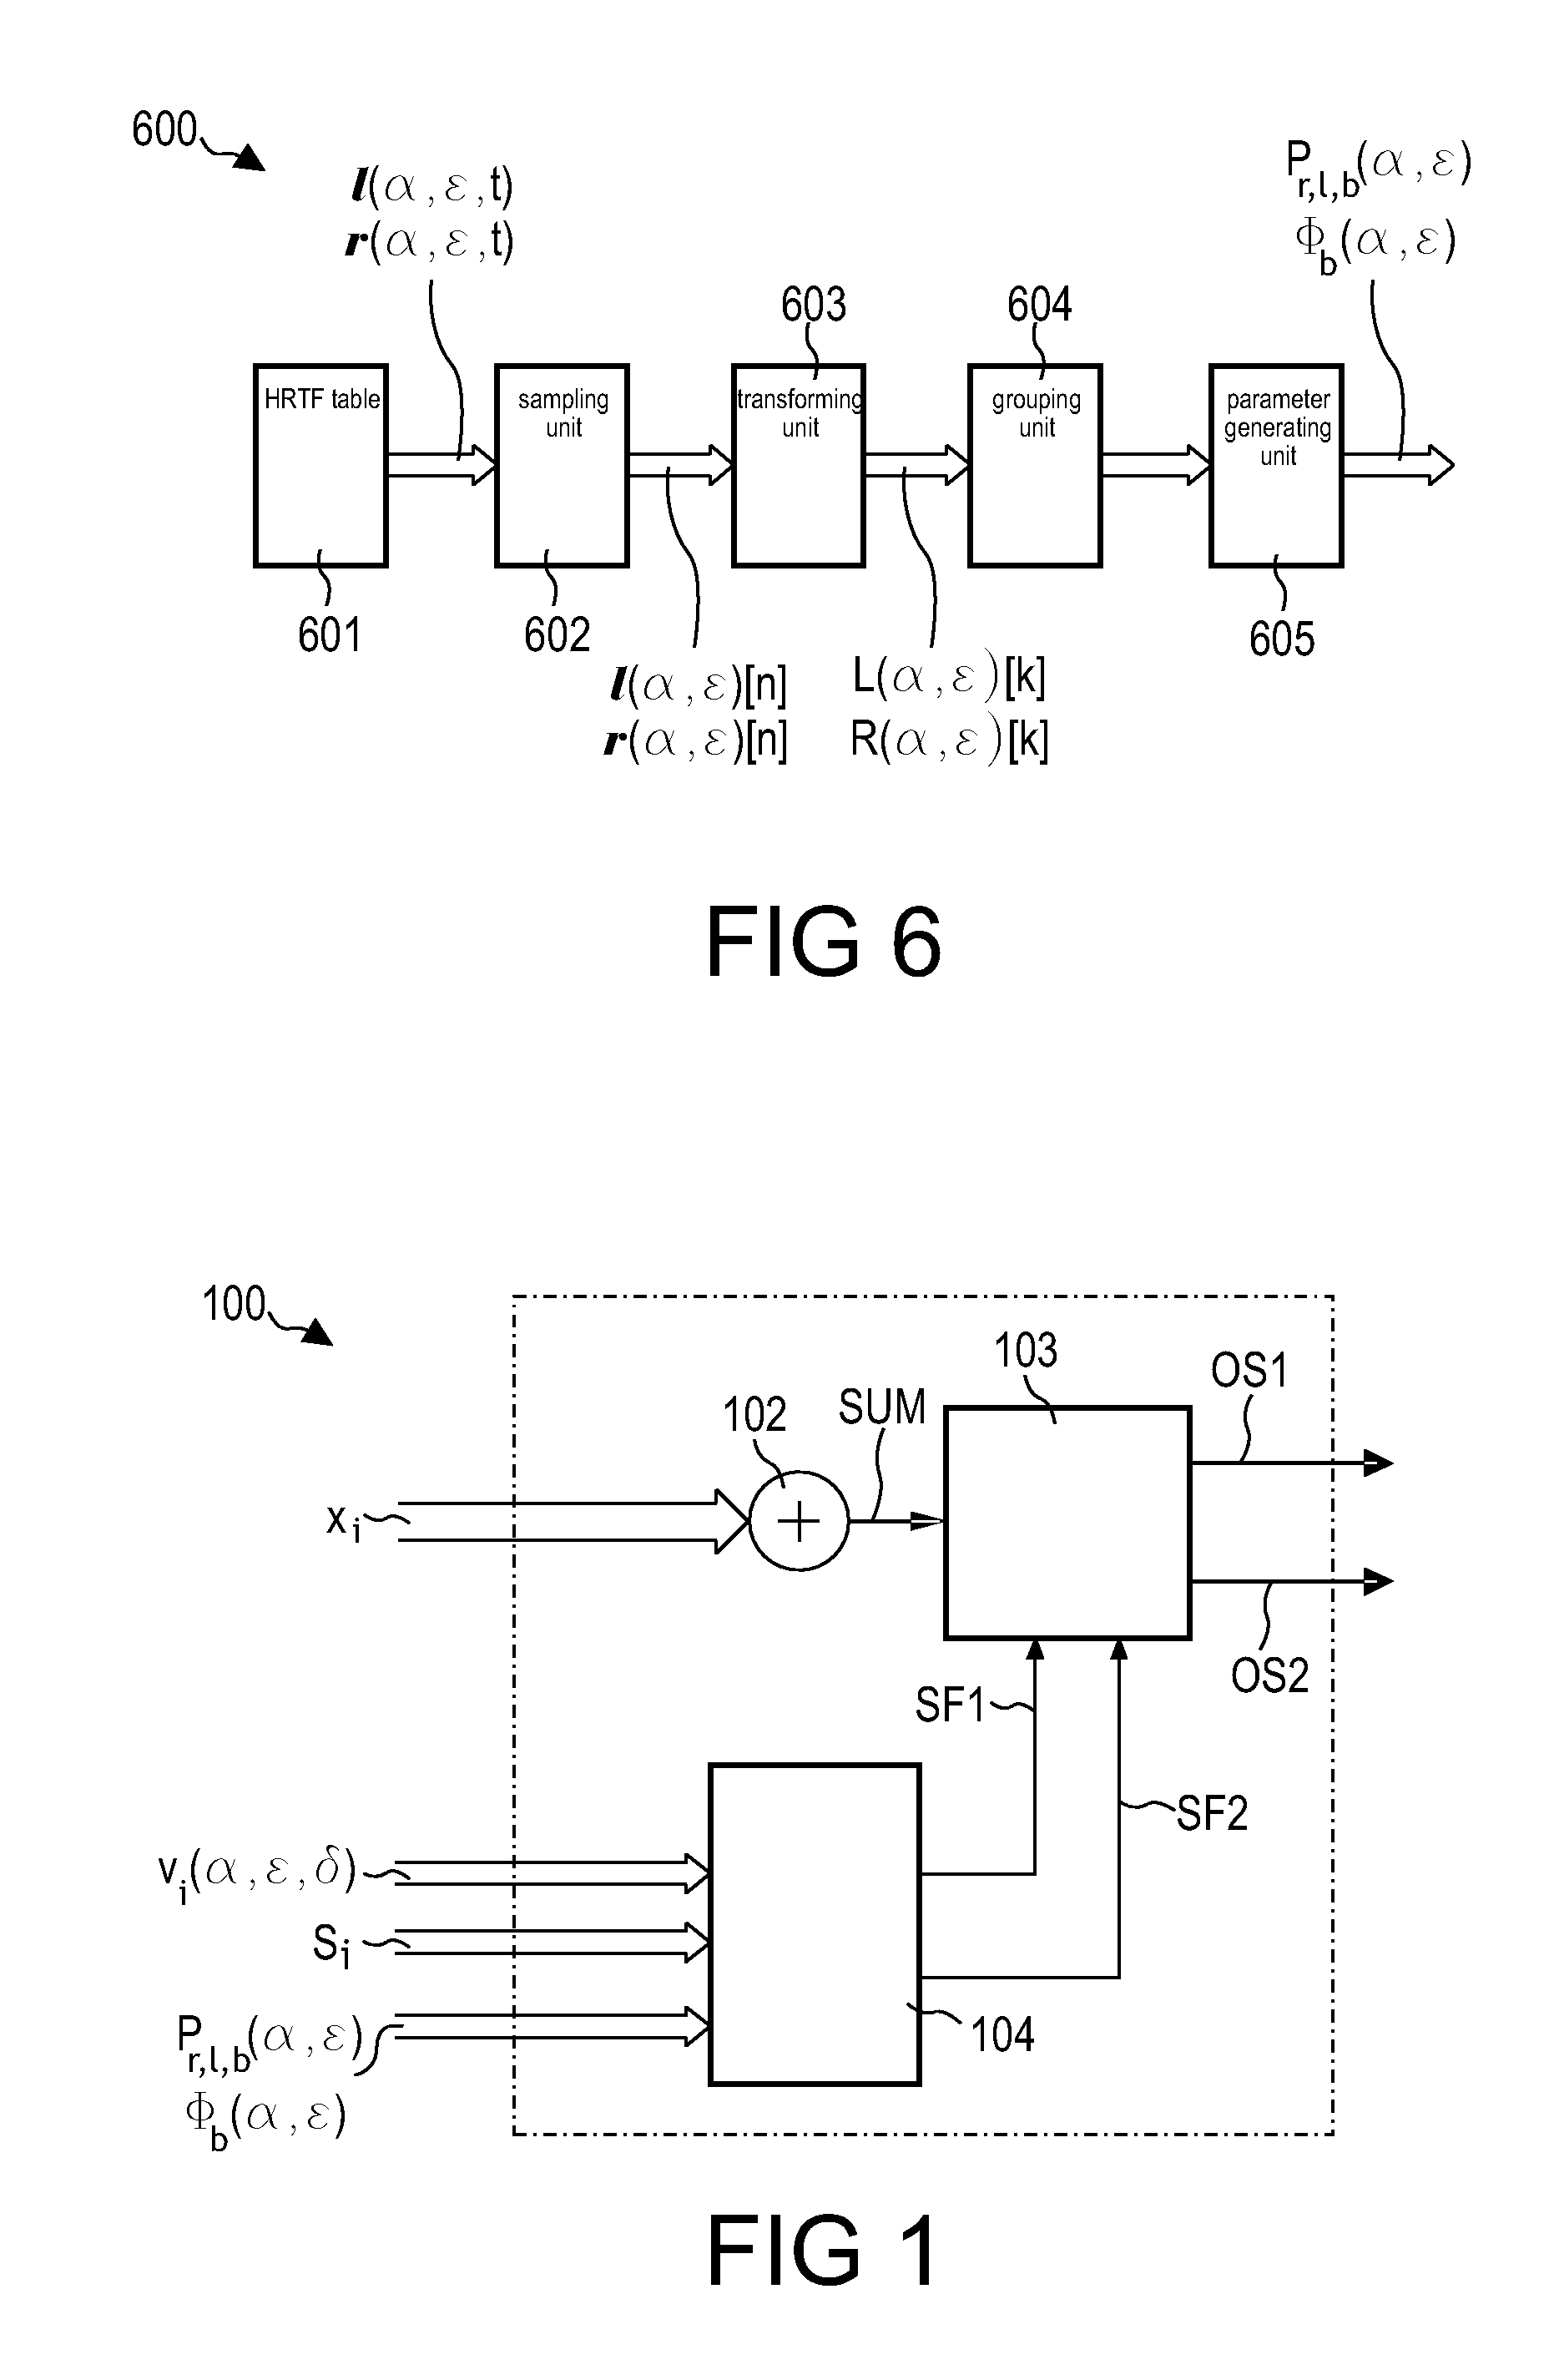 Method of and device for generating and processing parameters representing HRTFs